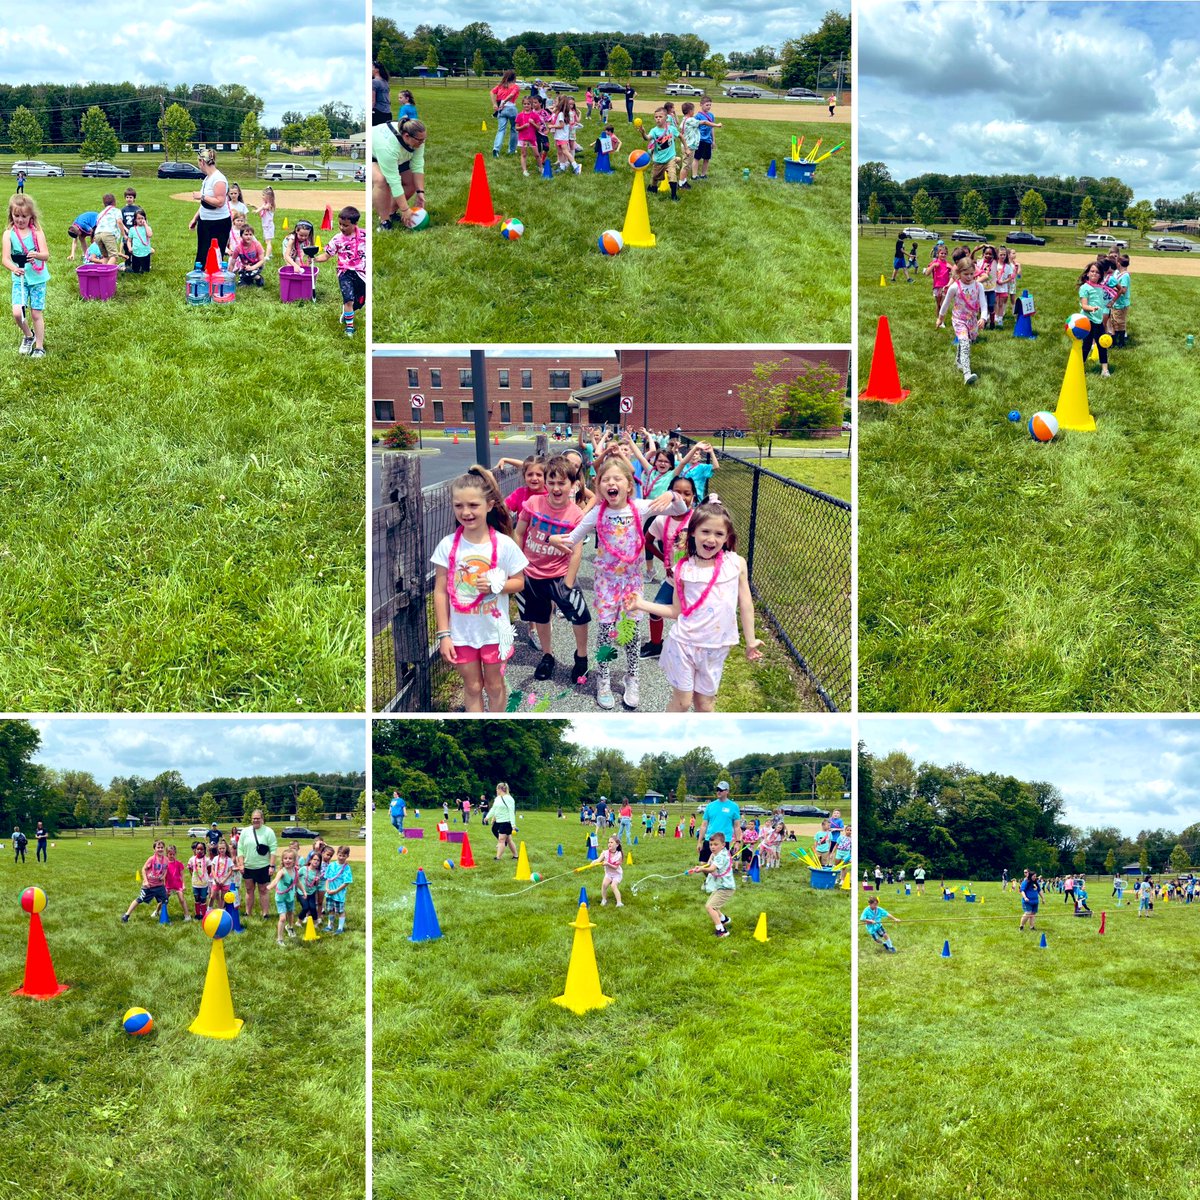 Field day fun for everyone! Thank you @MrClarkPhysEd and all the many volunteers for a great day! #islandstyle #bermuda🏝️☀️😎🇧🇲